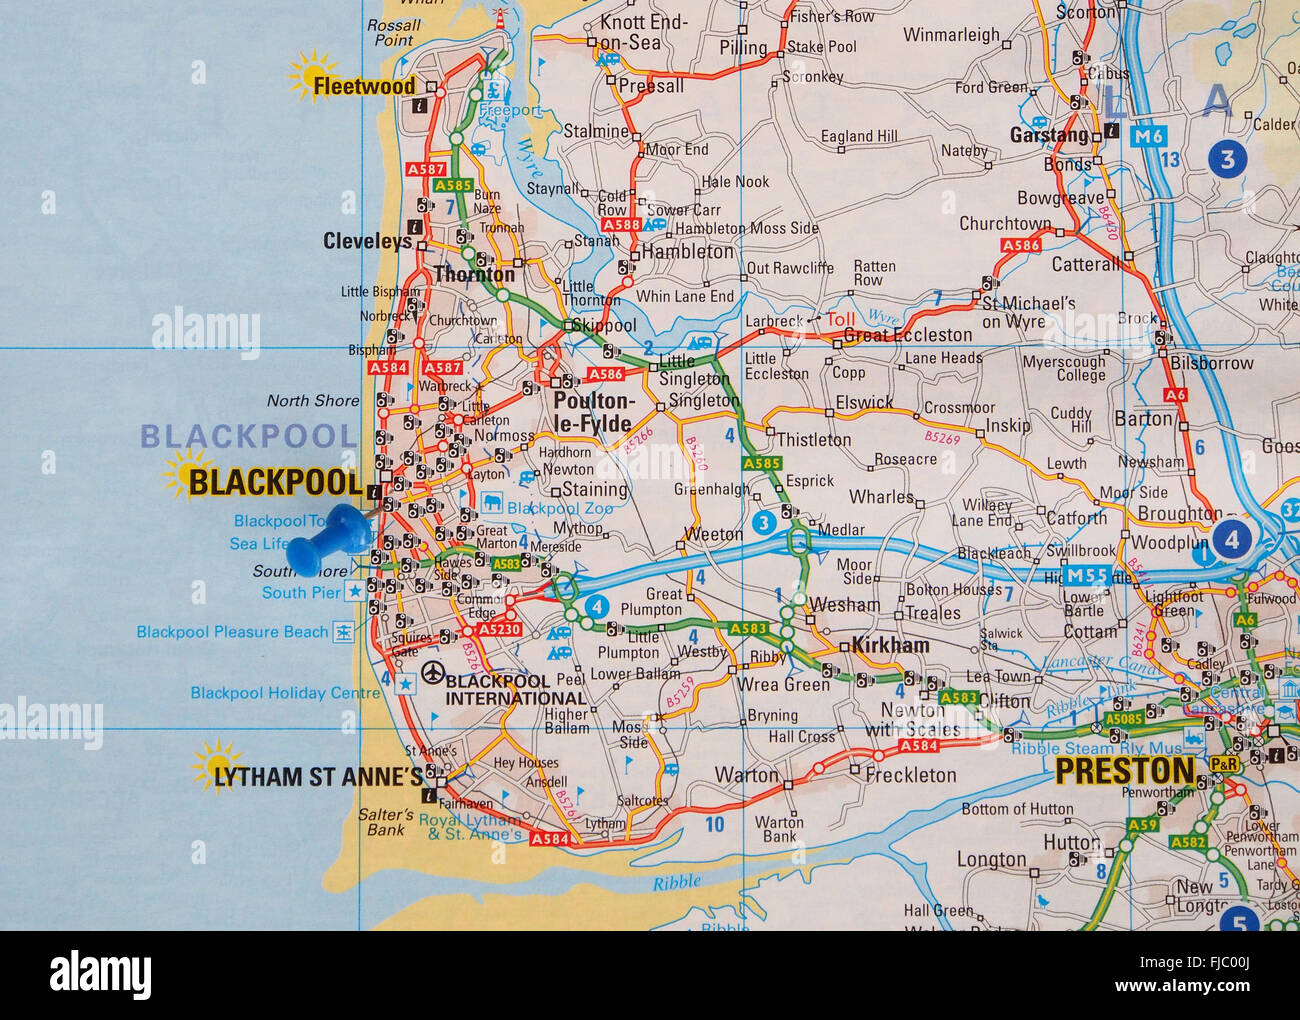 Road map of the north coast of England, showing Fleetwood, Cleveleys ...